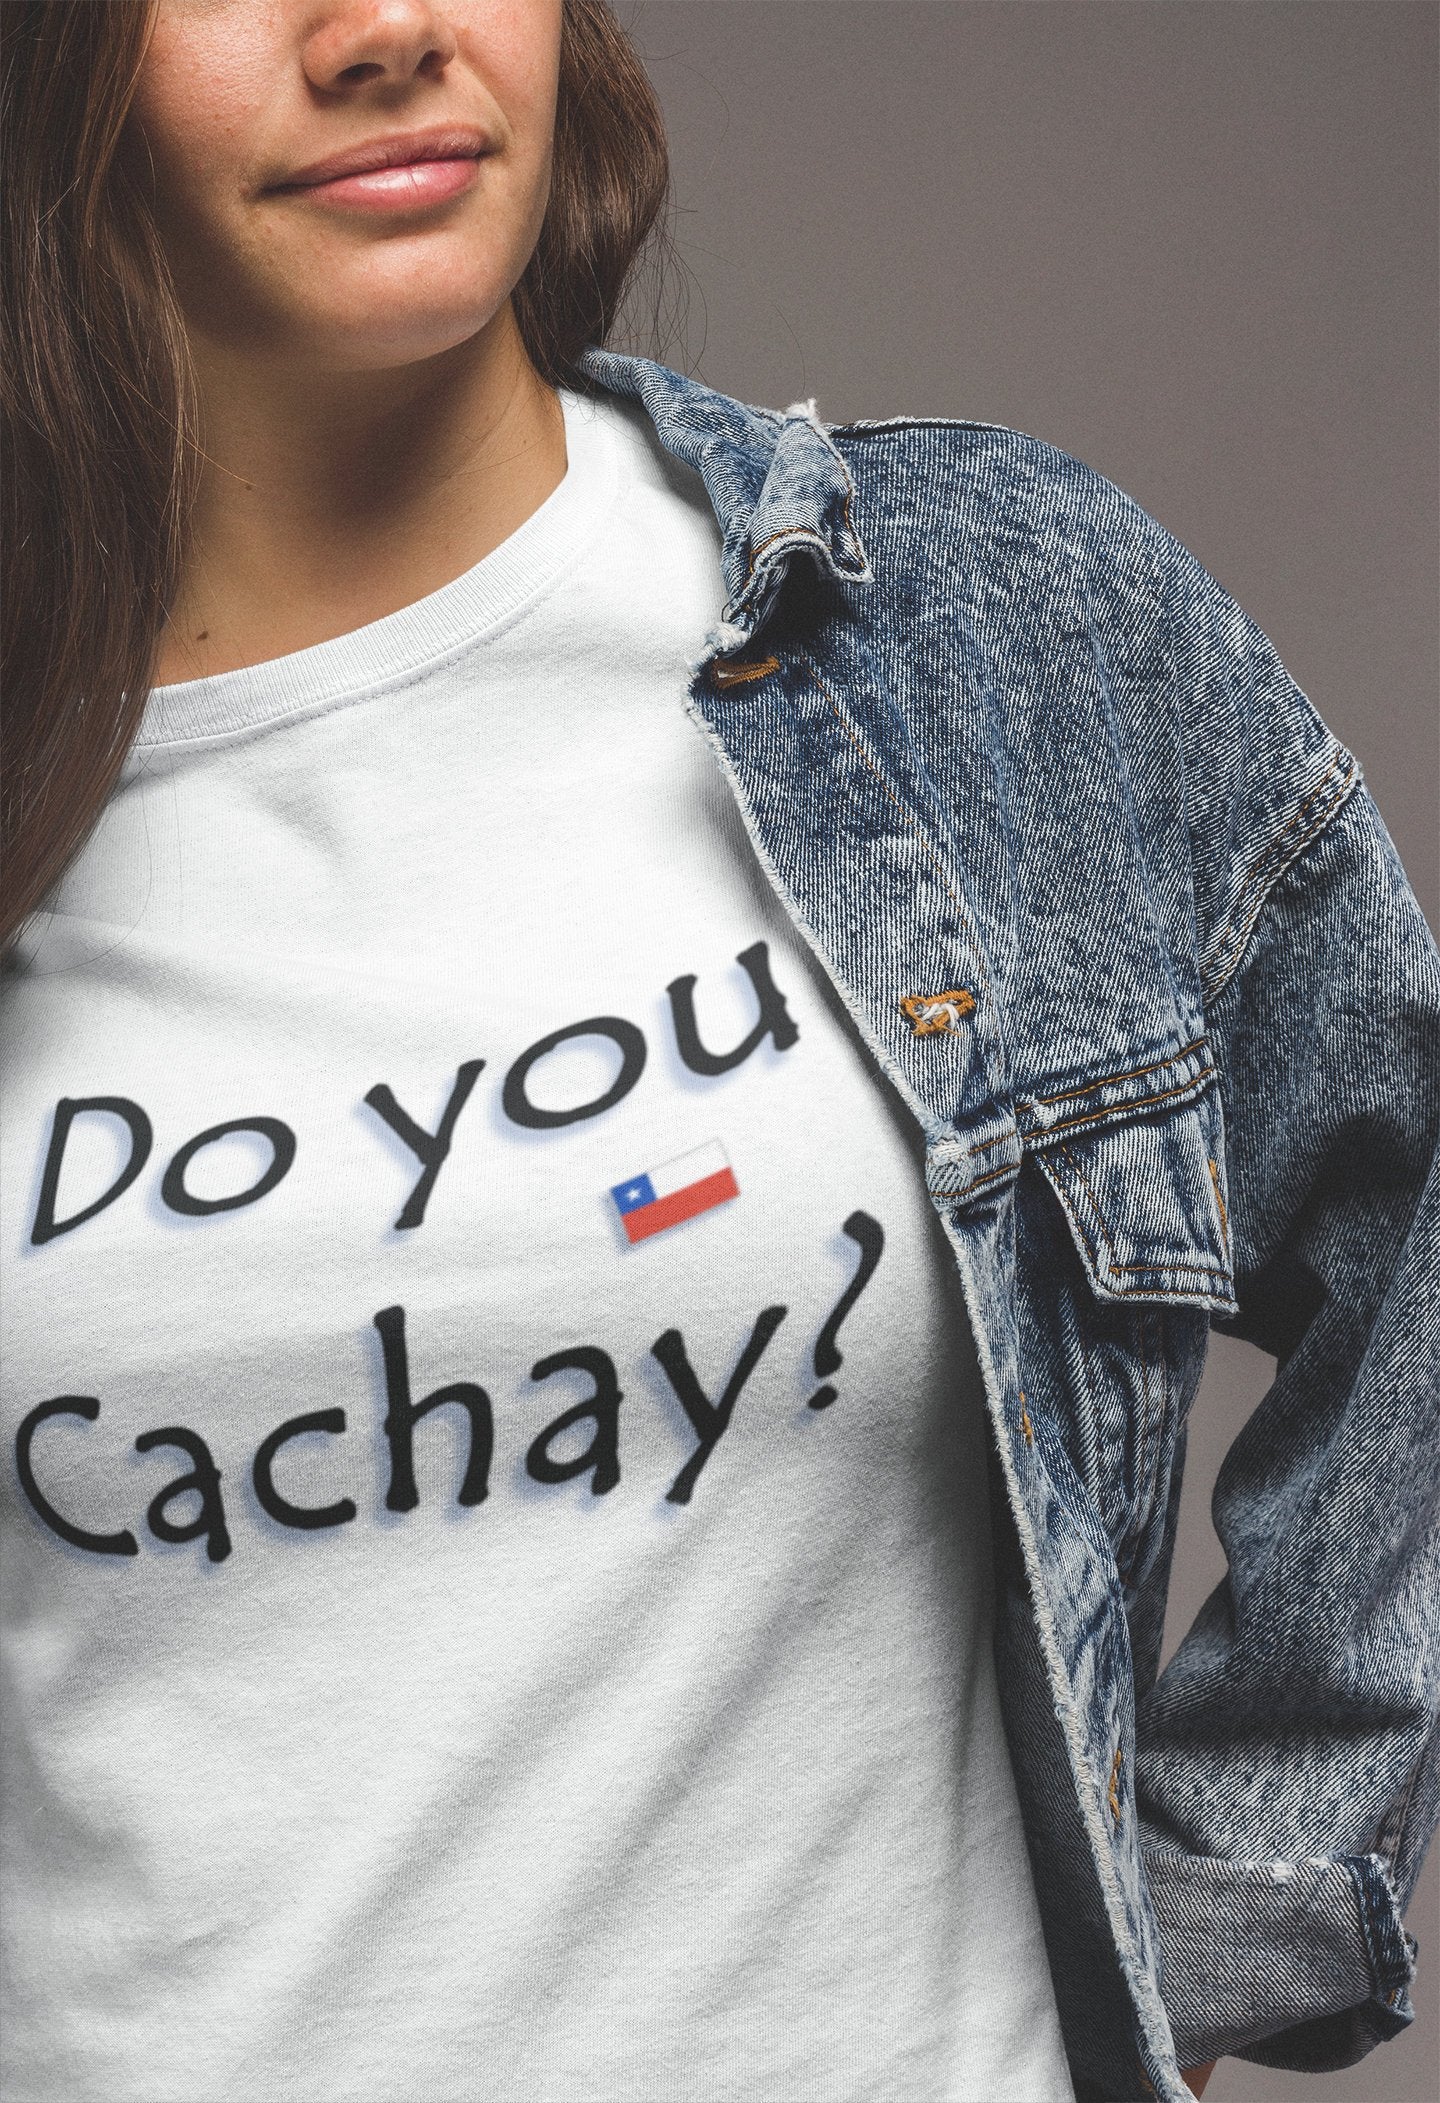 Chilean funny Shirt  Do You Cachay Short-Sleeve Unisex Chile T-Shirt